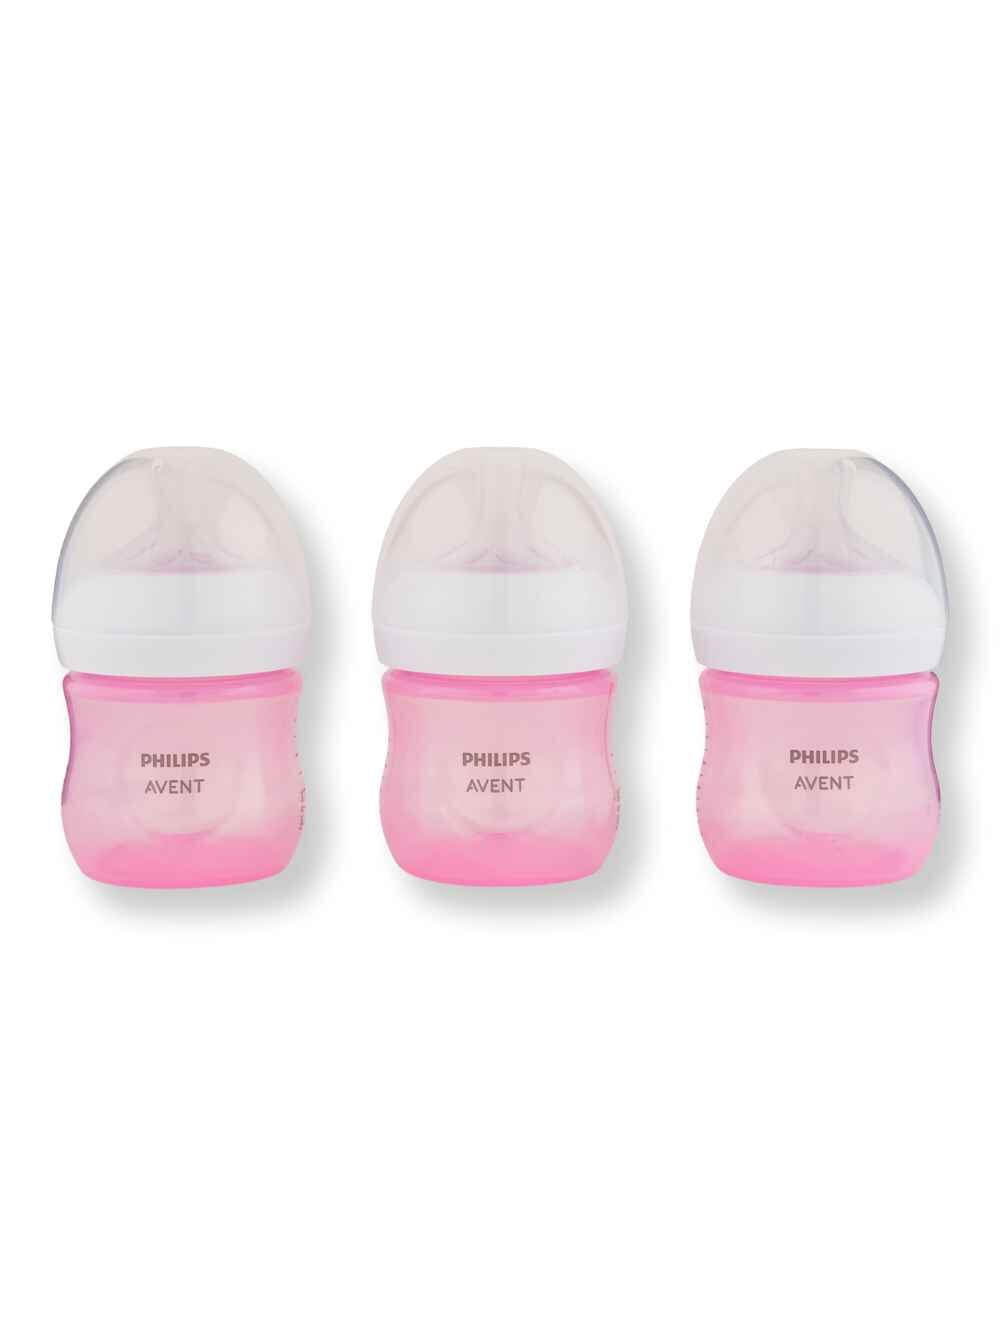 Philips Avent Philips Avent Natural Baby Bottle With Natural Response Nipple Pink 4 oz 3 Ct Baby Bottles 